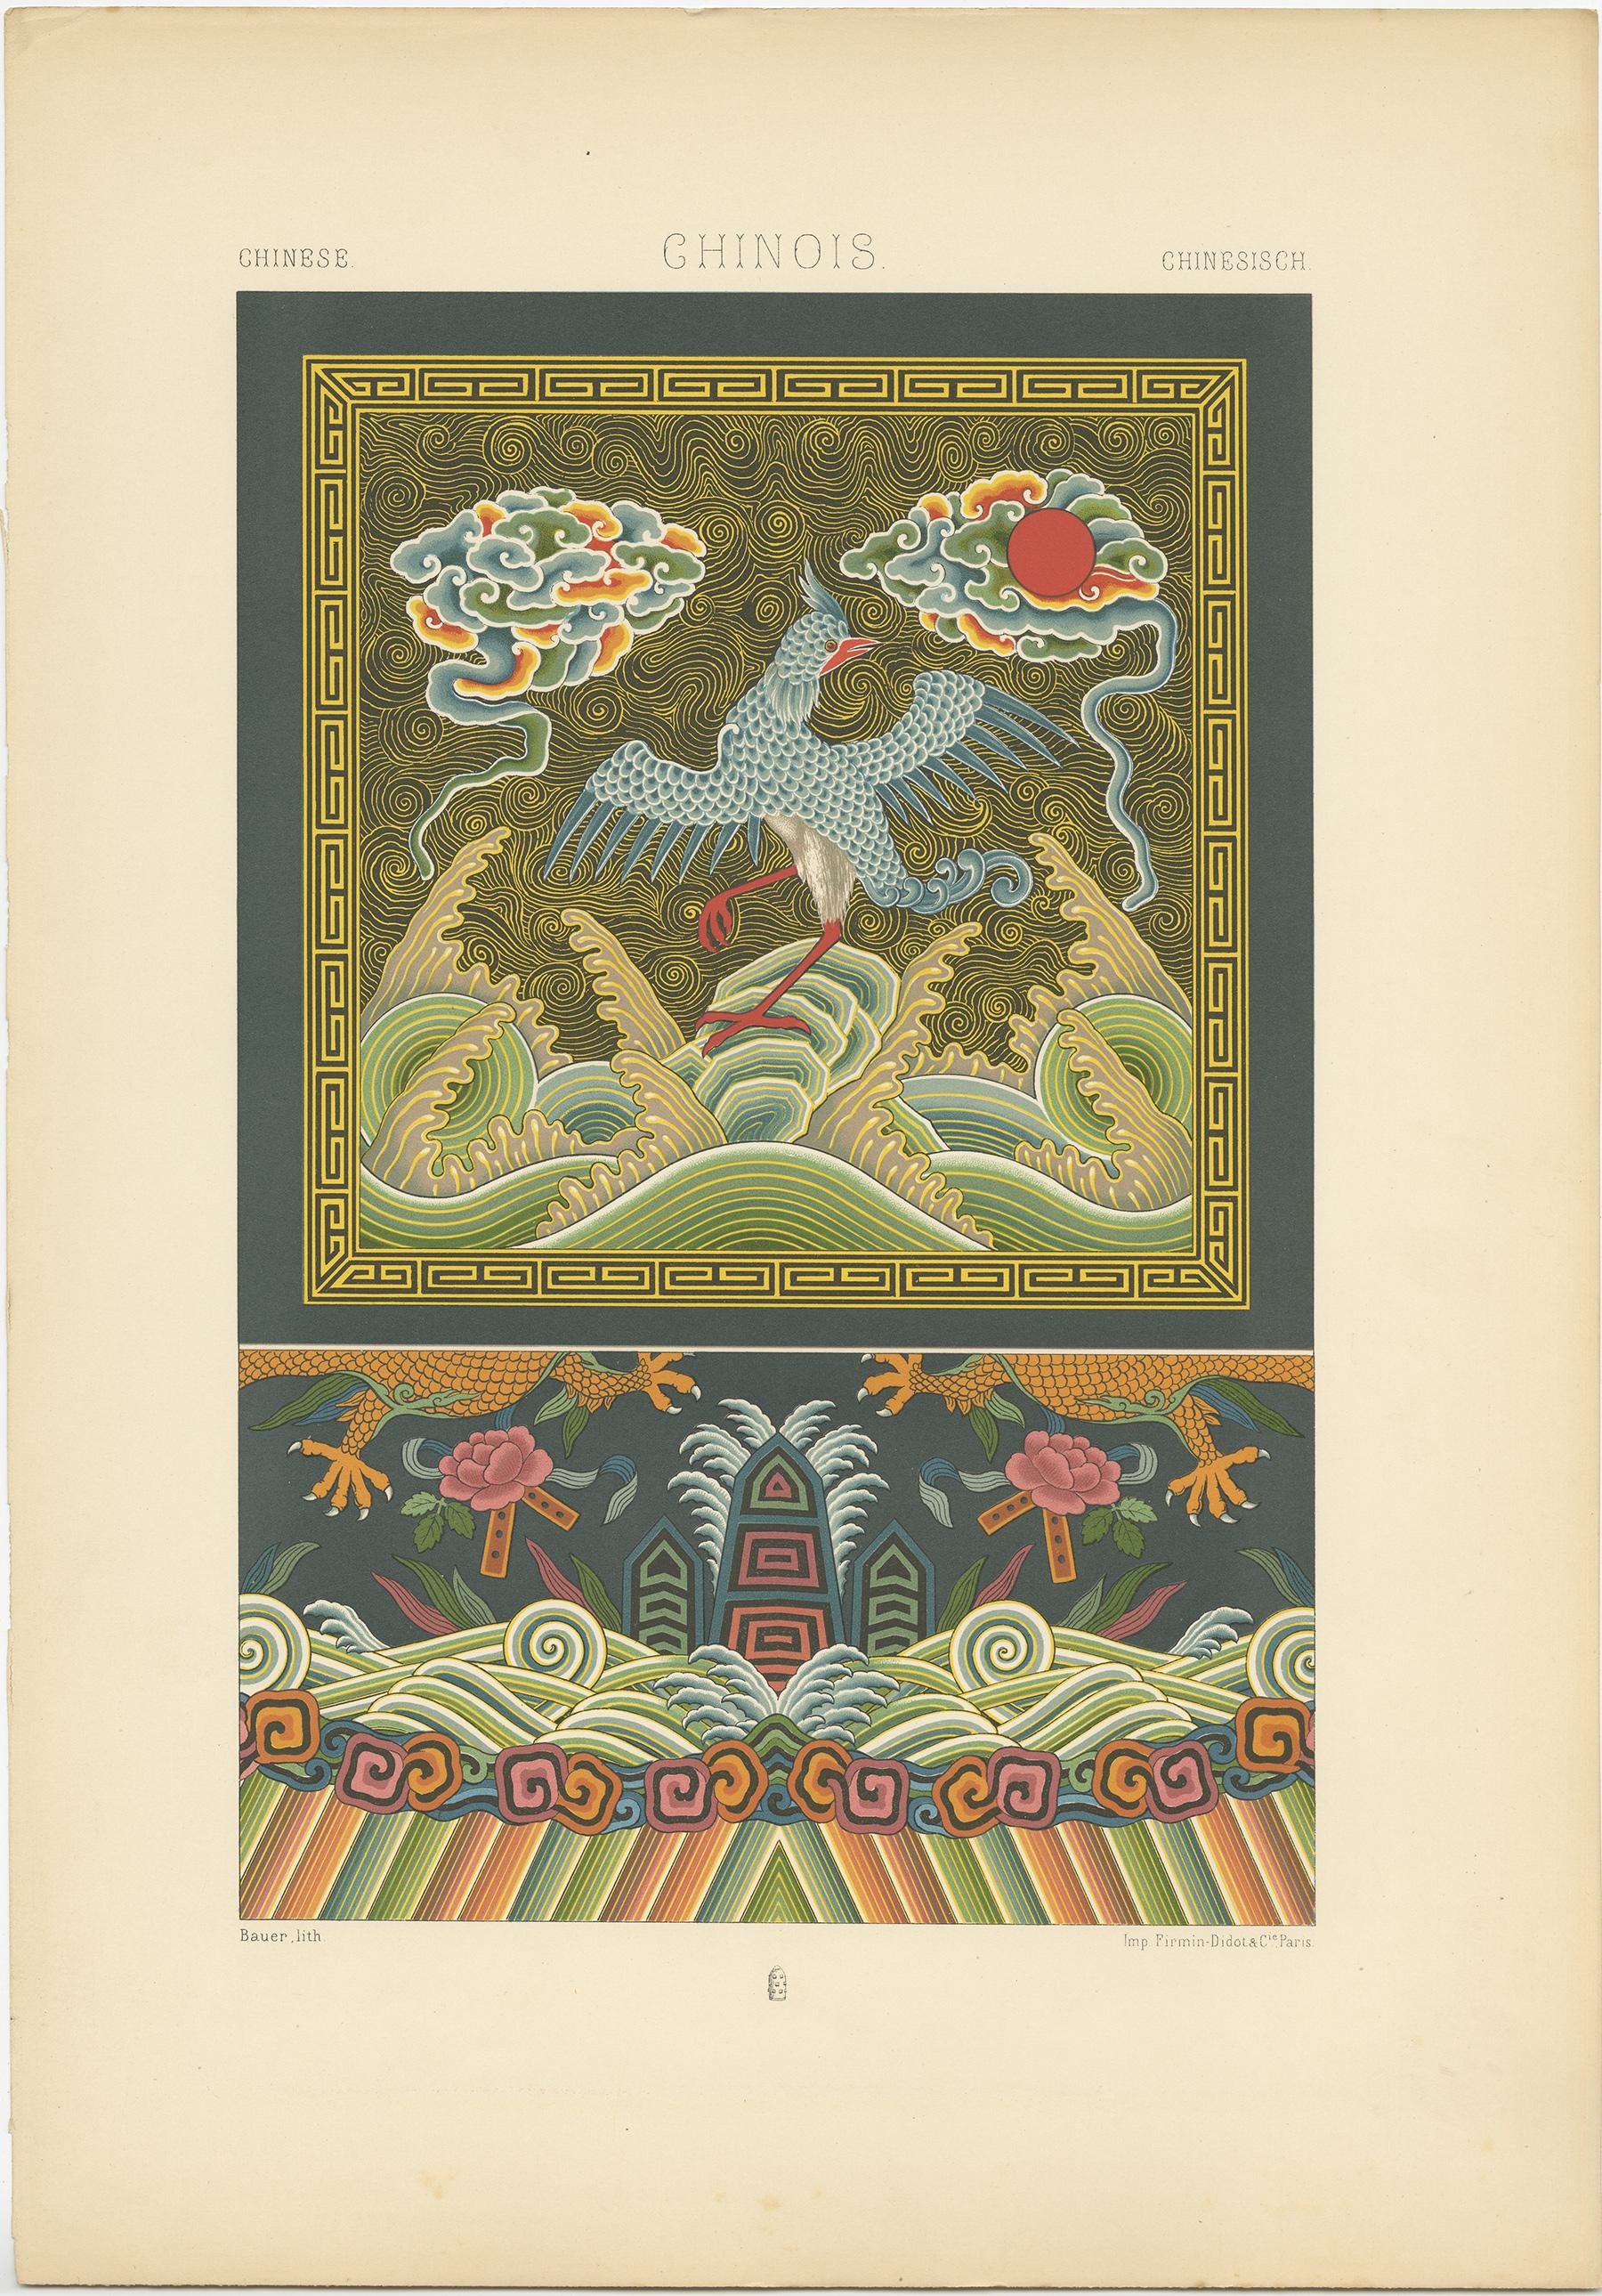 19th Century Pl. 6 Antique Print of Chinese Embroideries Ornaments by Racinet 'circa 1890' For Sale